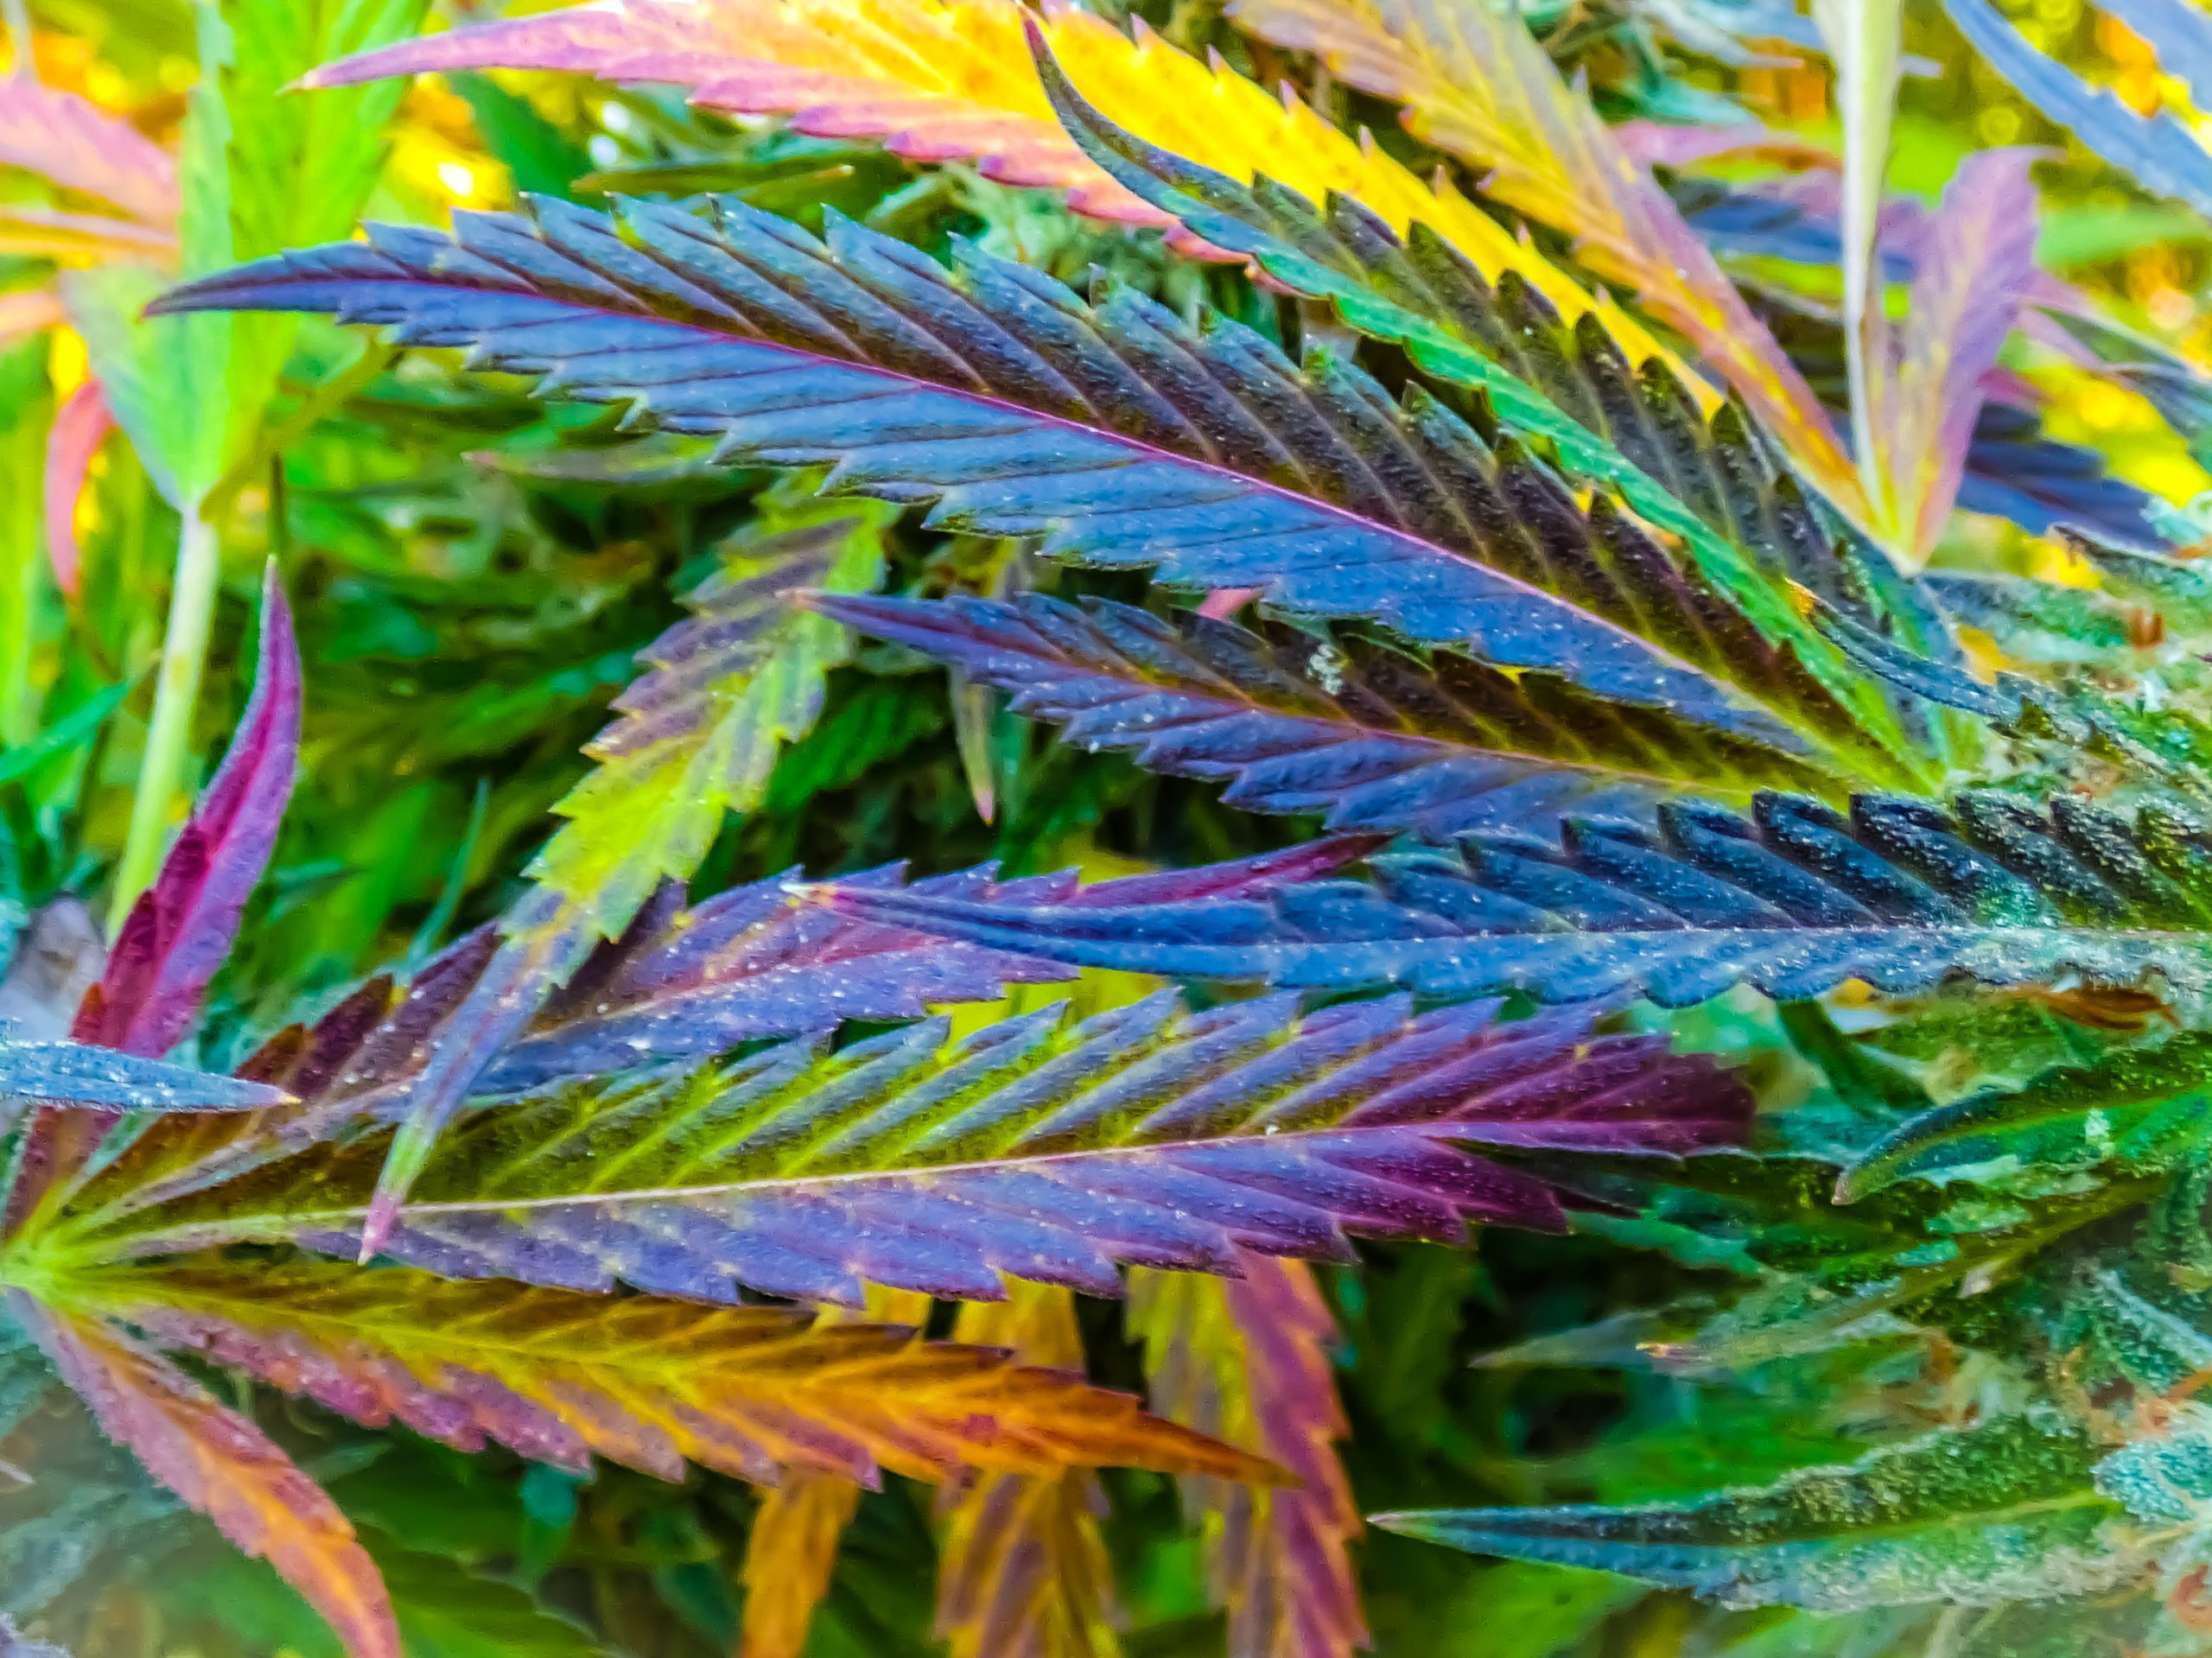 The Endless colors of cannabis